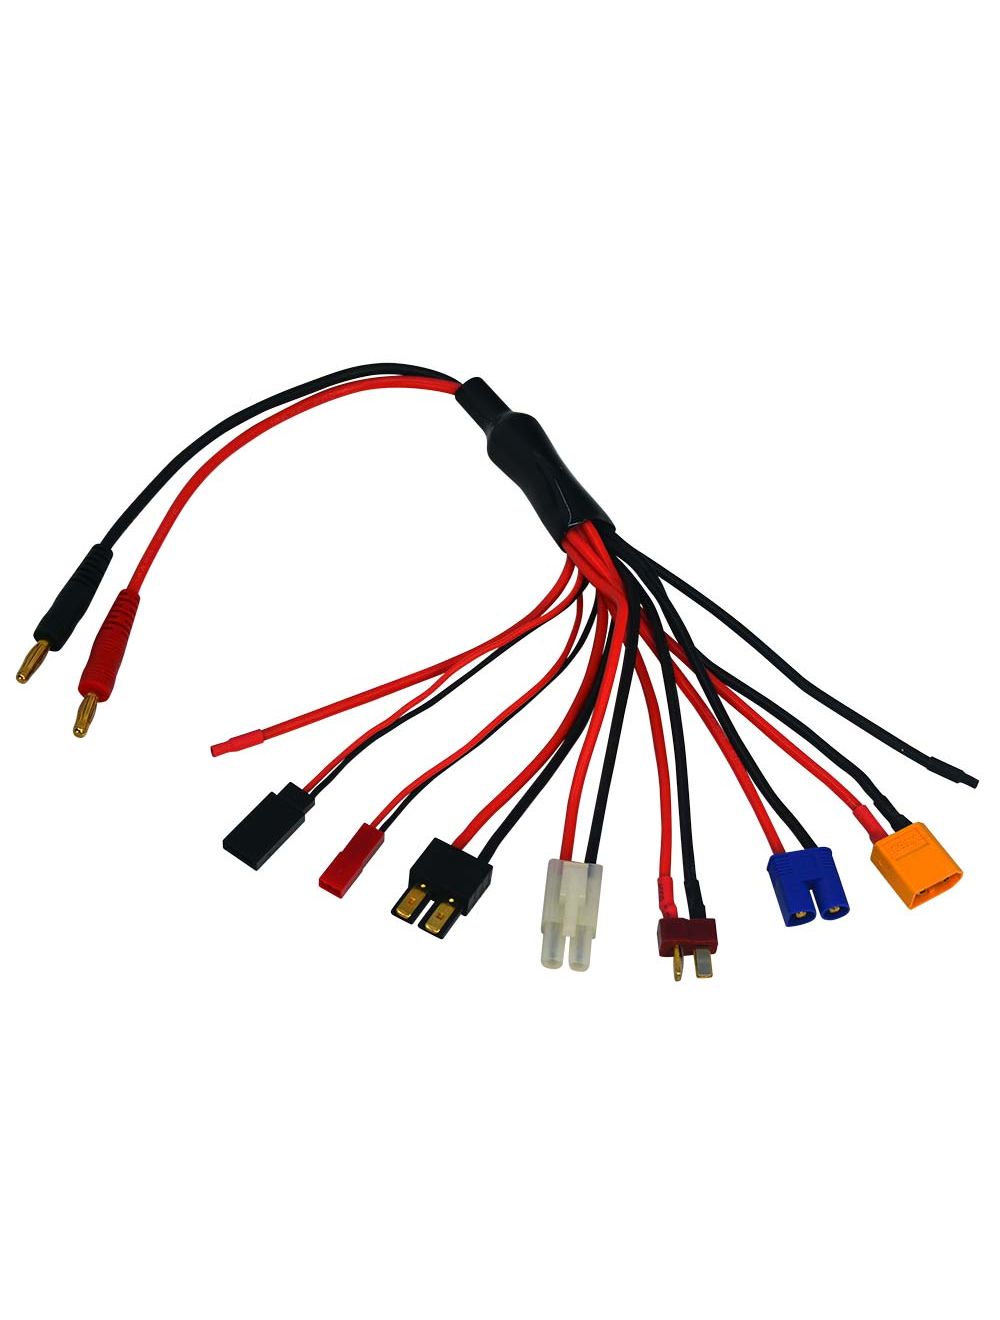 Overlander 8 in 1 Multiple Charge Lead to 4mm Gold Connectors 3459